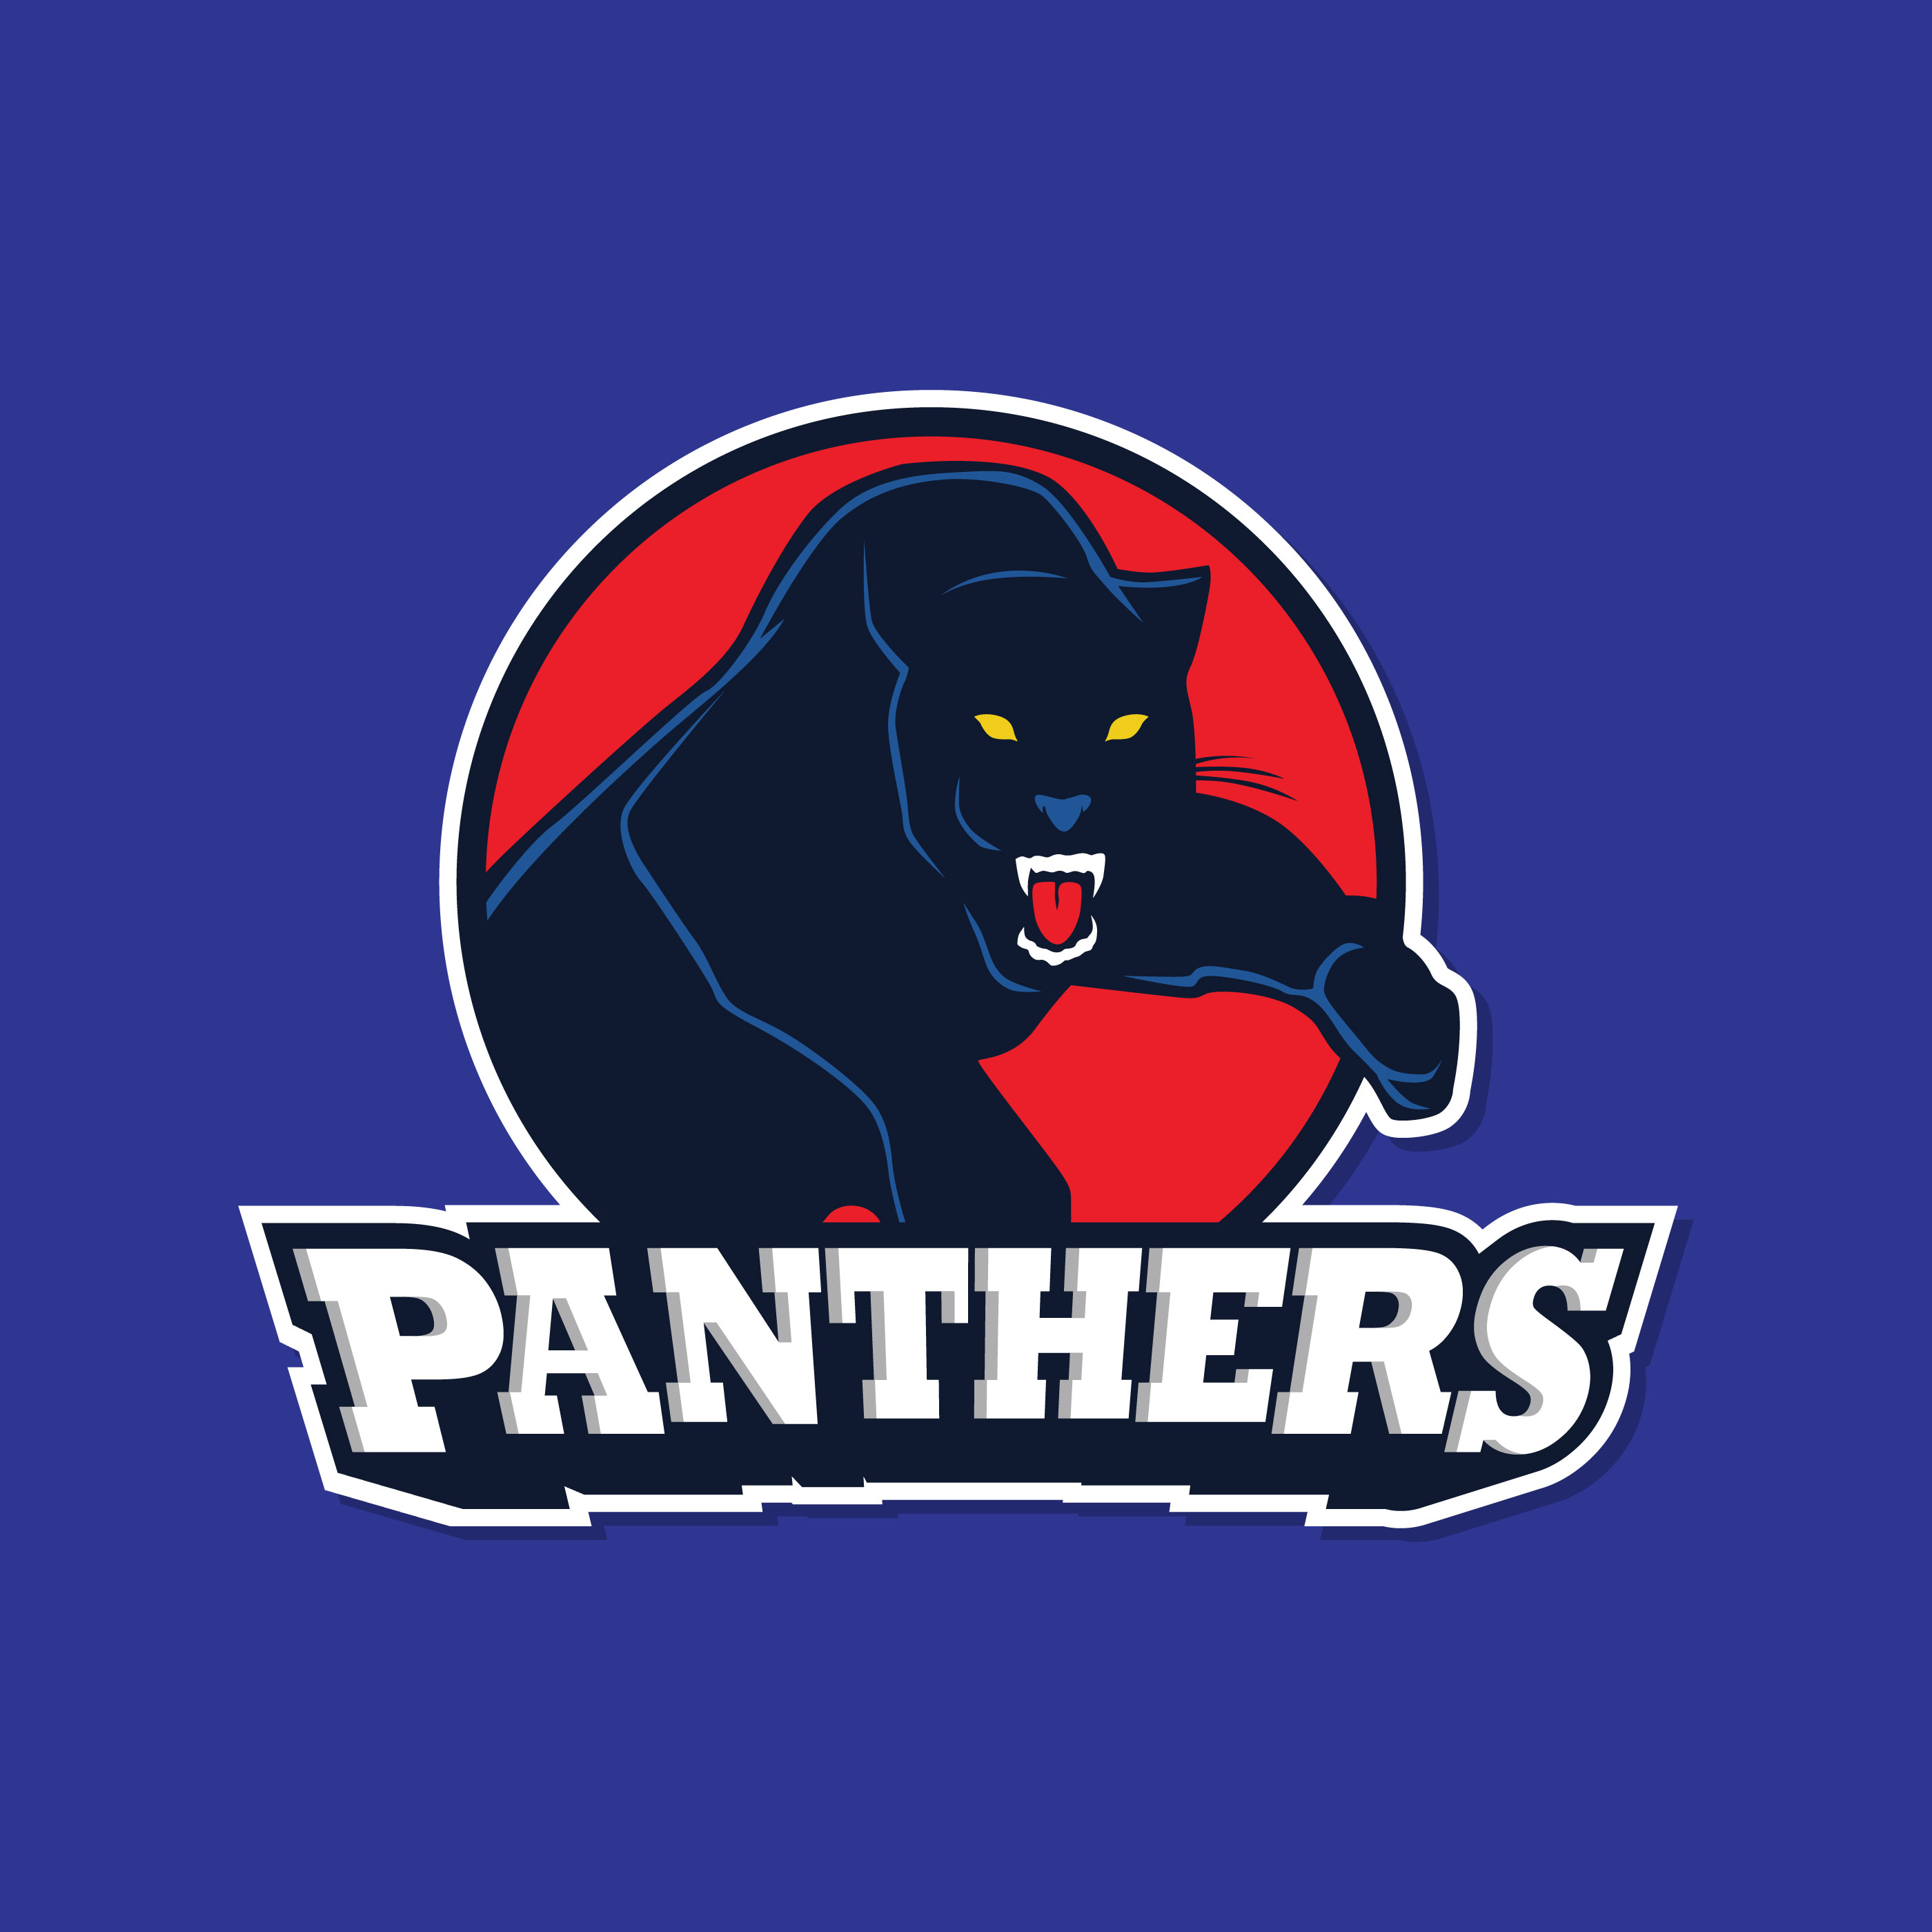 Download Black Panther Logo Vector for free.